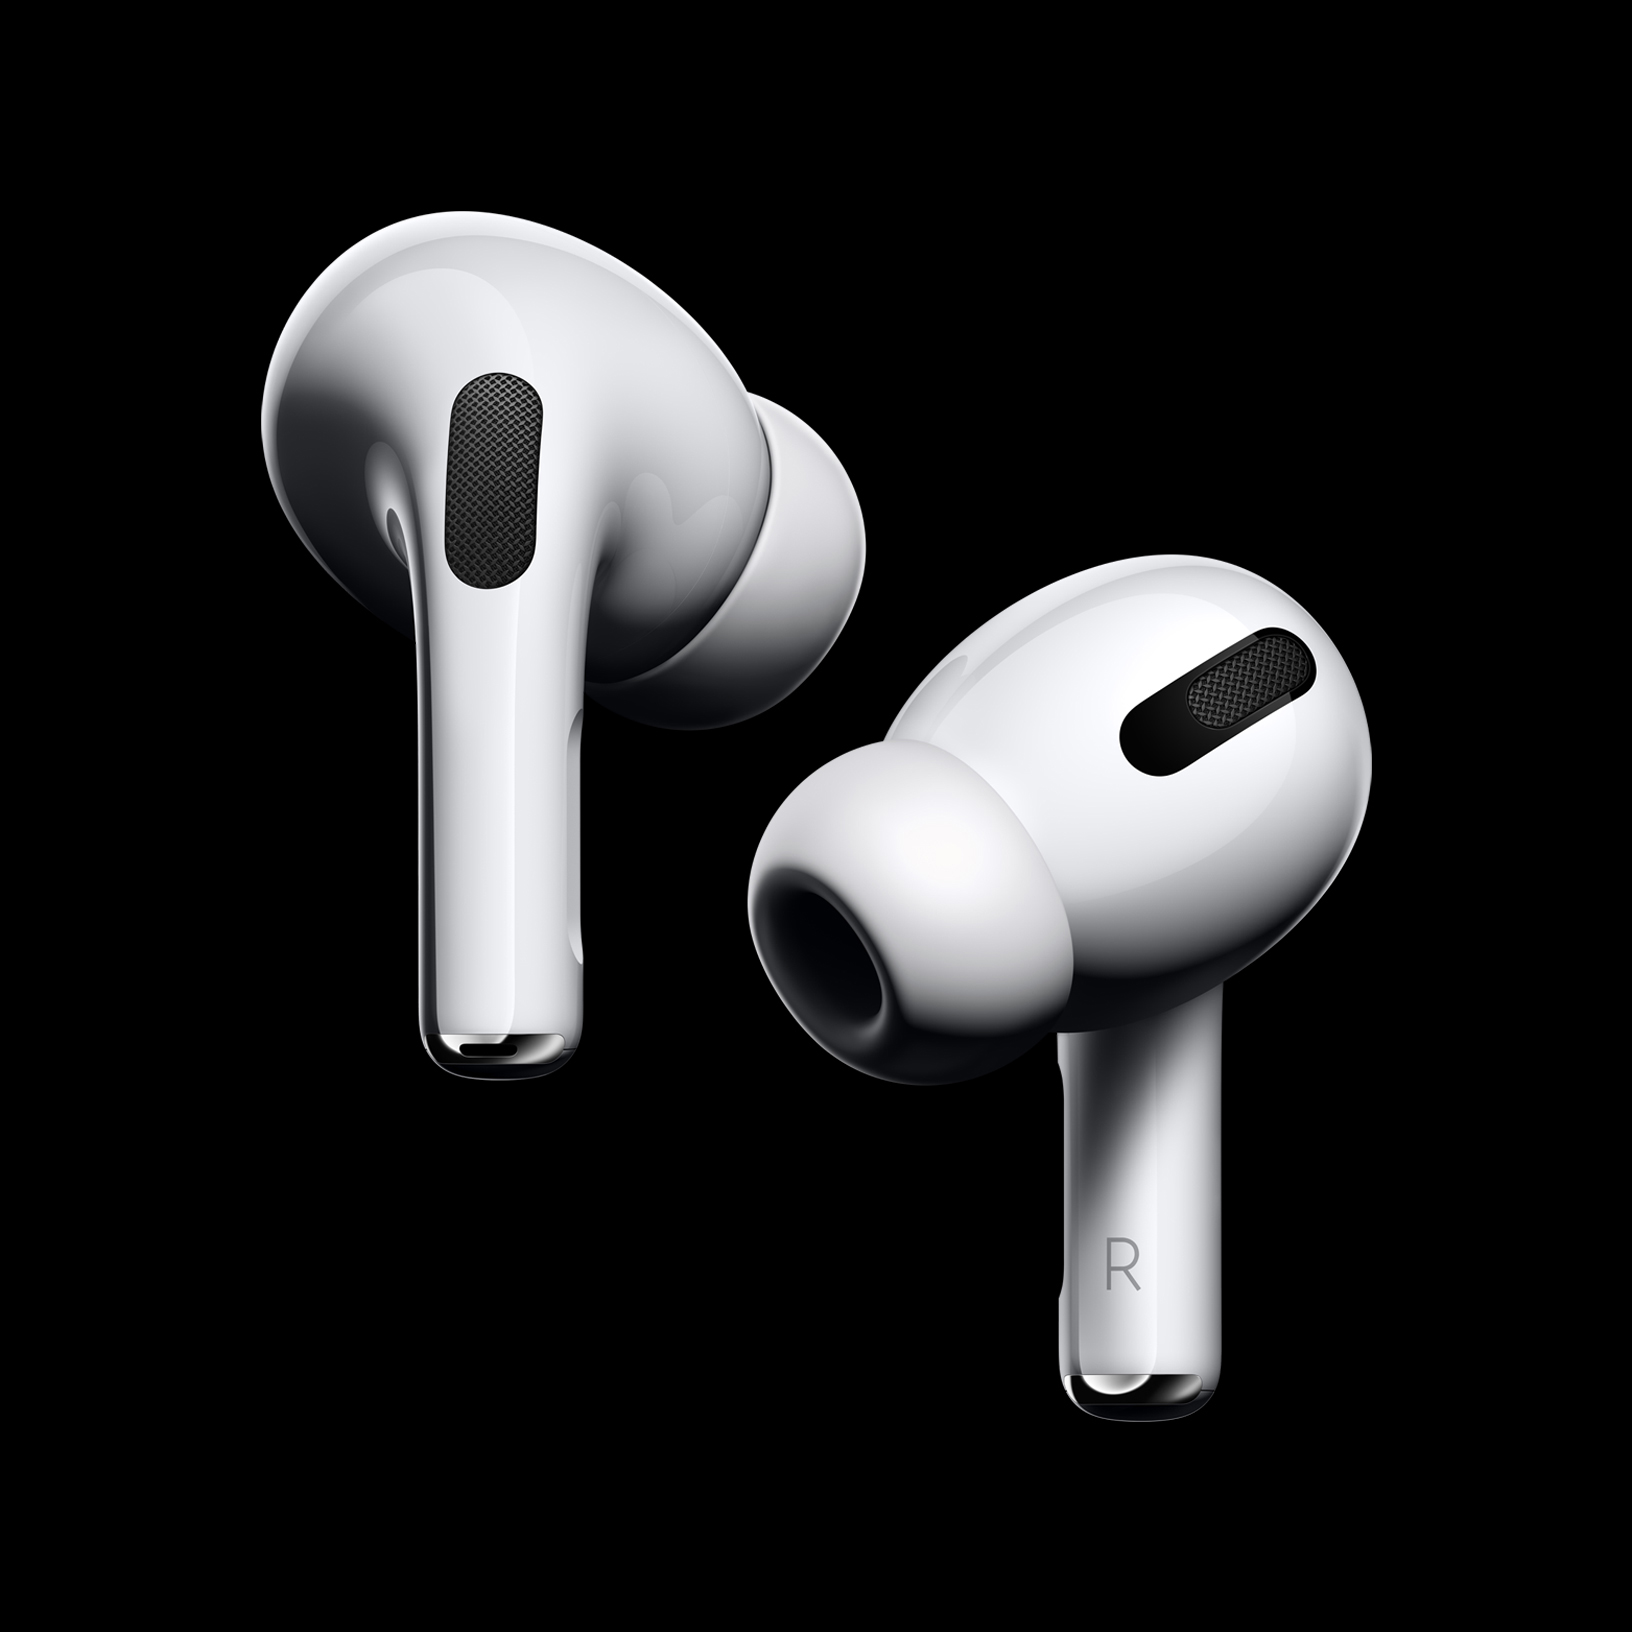 Black Friday deal at Amazon now live: Get Apple AirPods Pro for only $169, $80 off MSRP, lowest ...